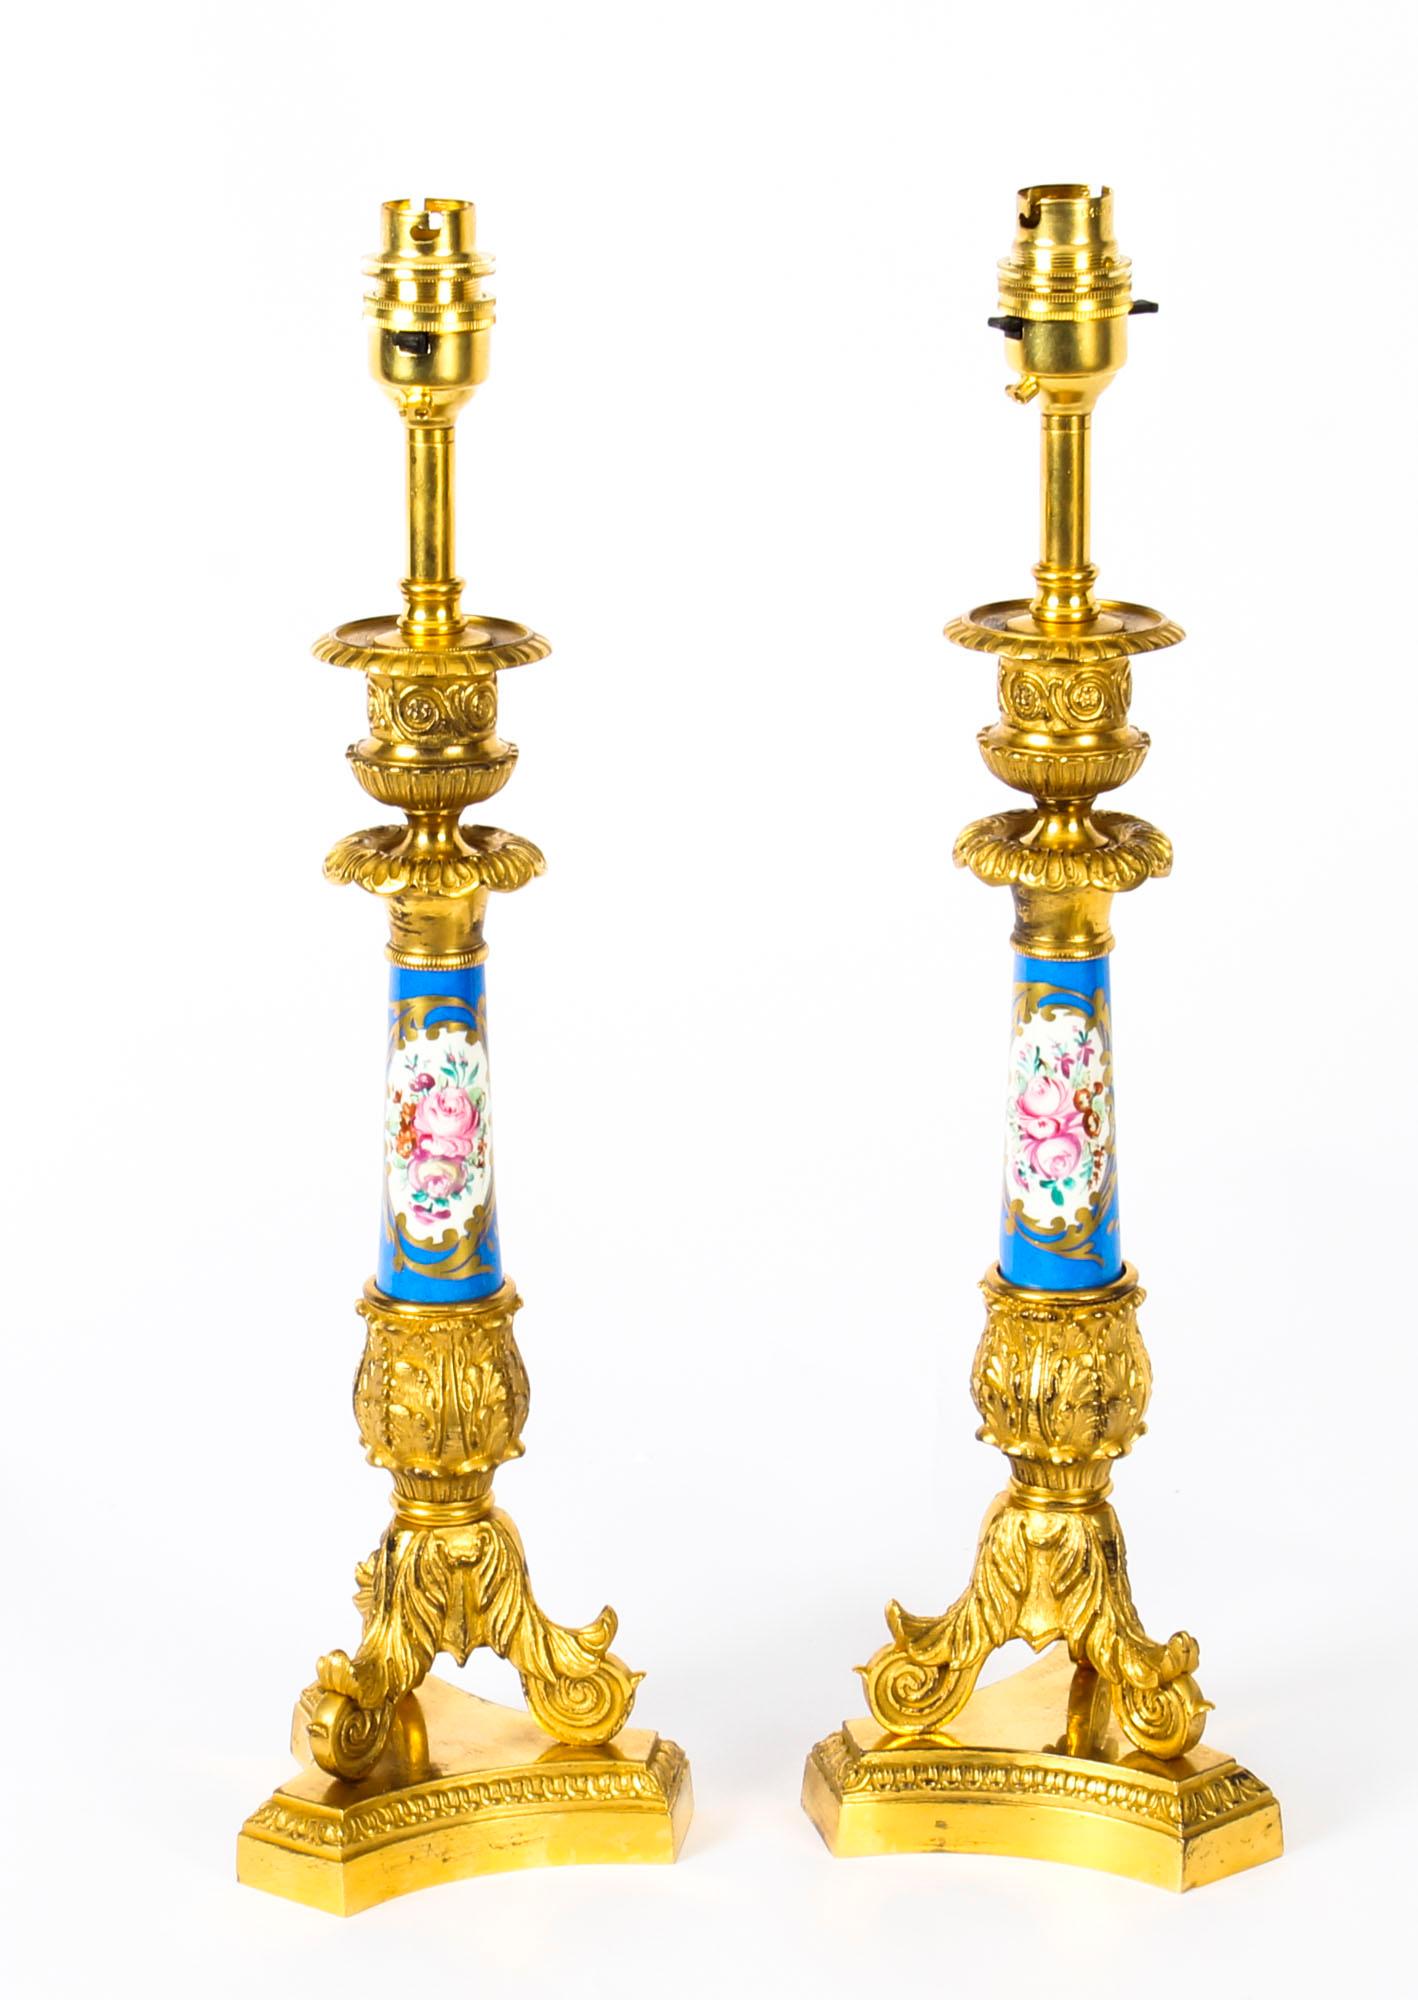 This is a beautiful antique pair of French Sevres Porcelain candlesticks converted to lamps, dating from the late 19th century.

The decorative lamps feature urn form candle sconces above Sèvres porcelain columns decorated with floral reserves on